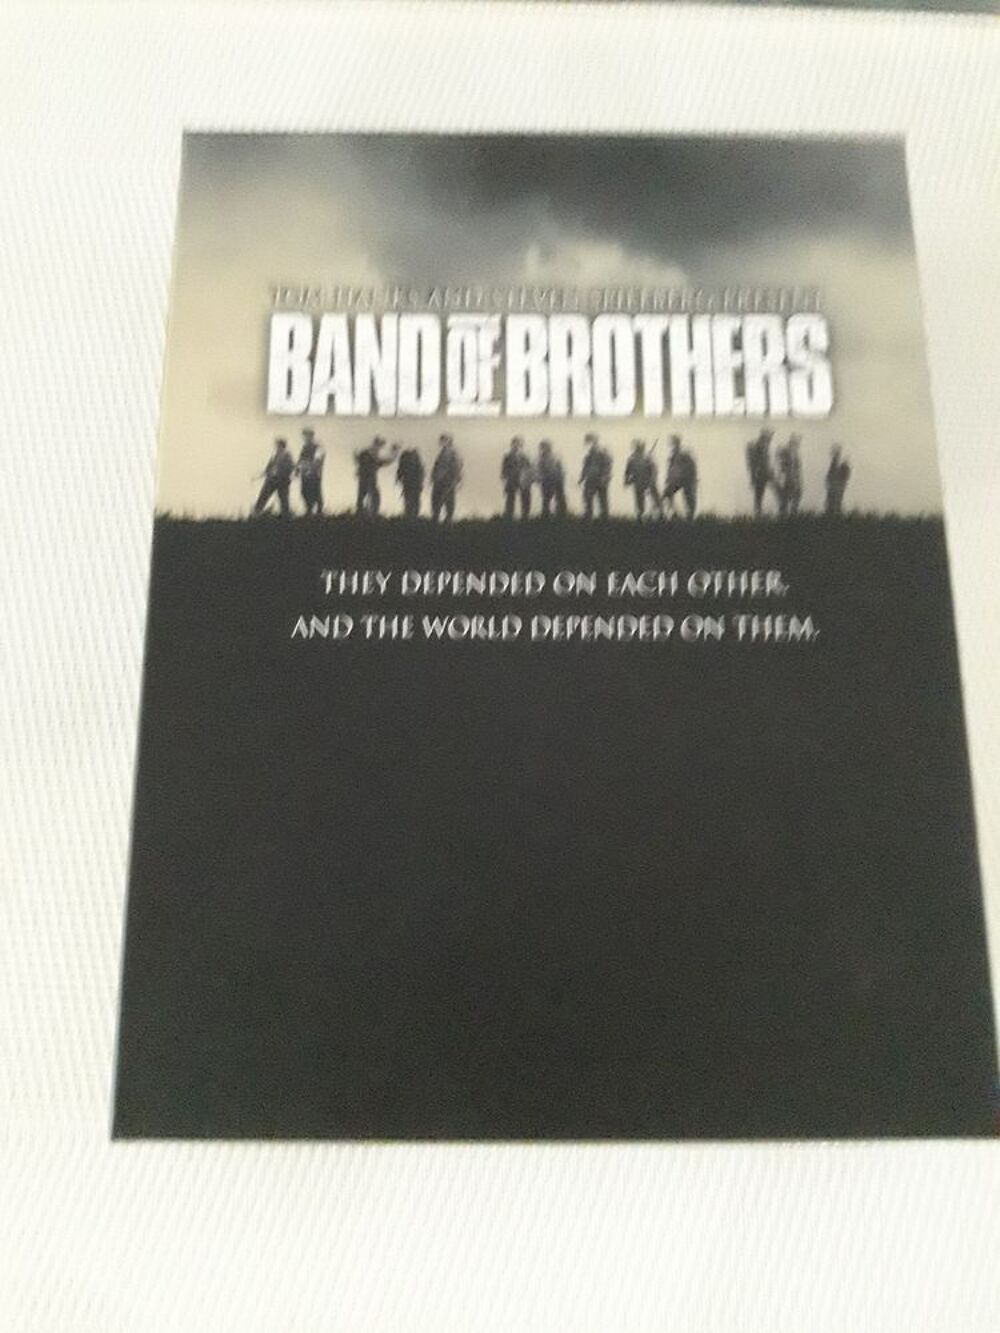 Coffret DVD Band of brothers DVD et blu-ray